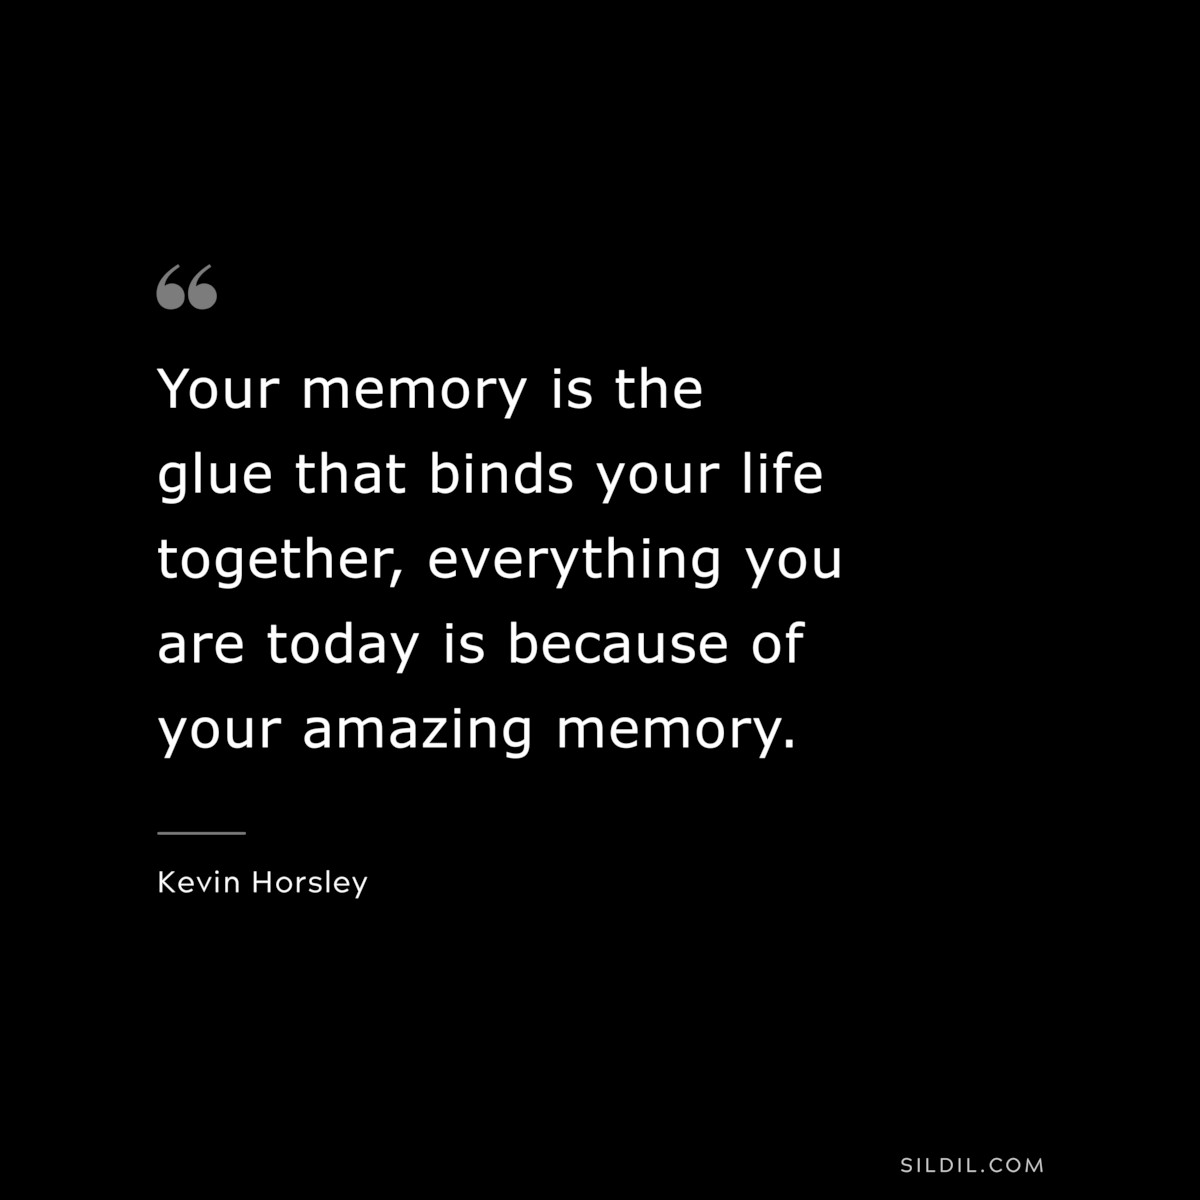 Your memory is the glue that binds your life together, everything you are today is because of your amazing memory. ― Kevin Horsley